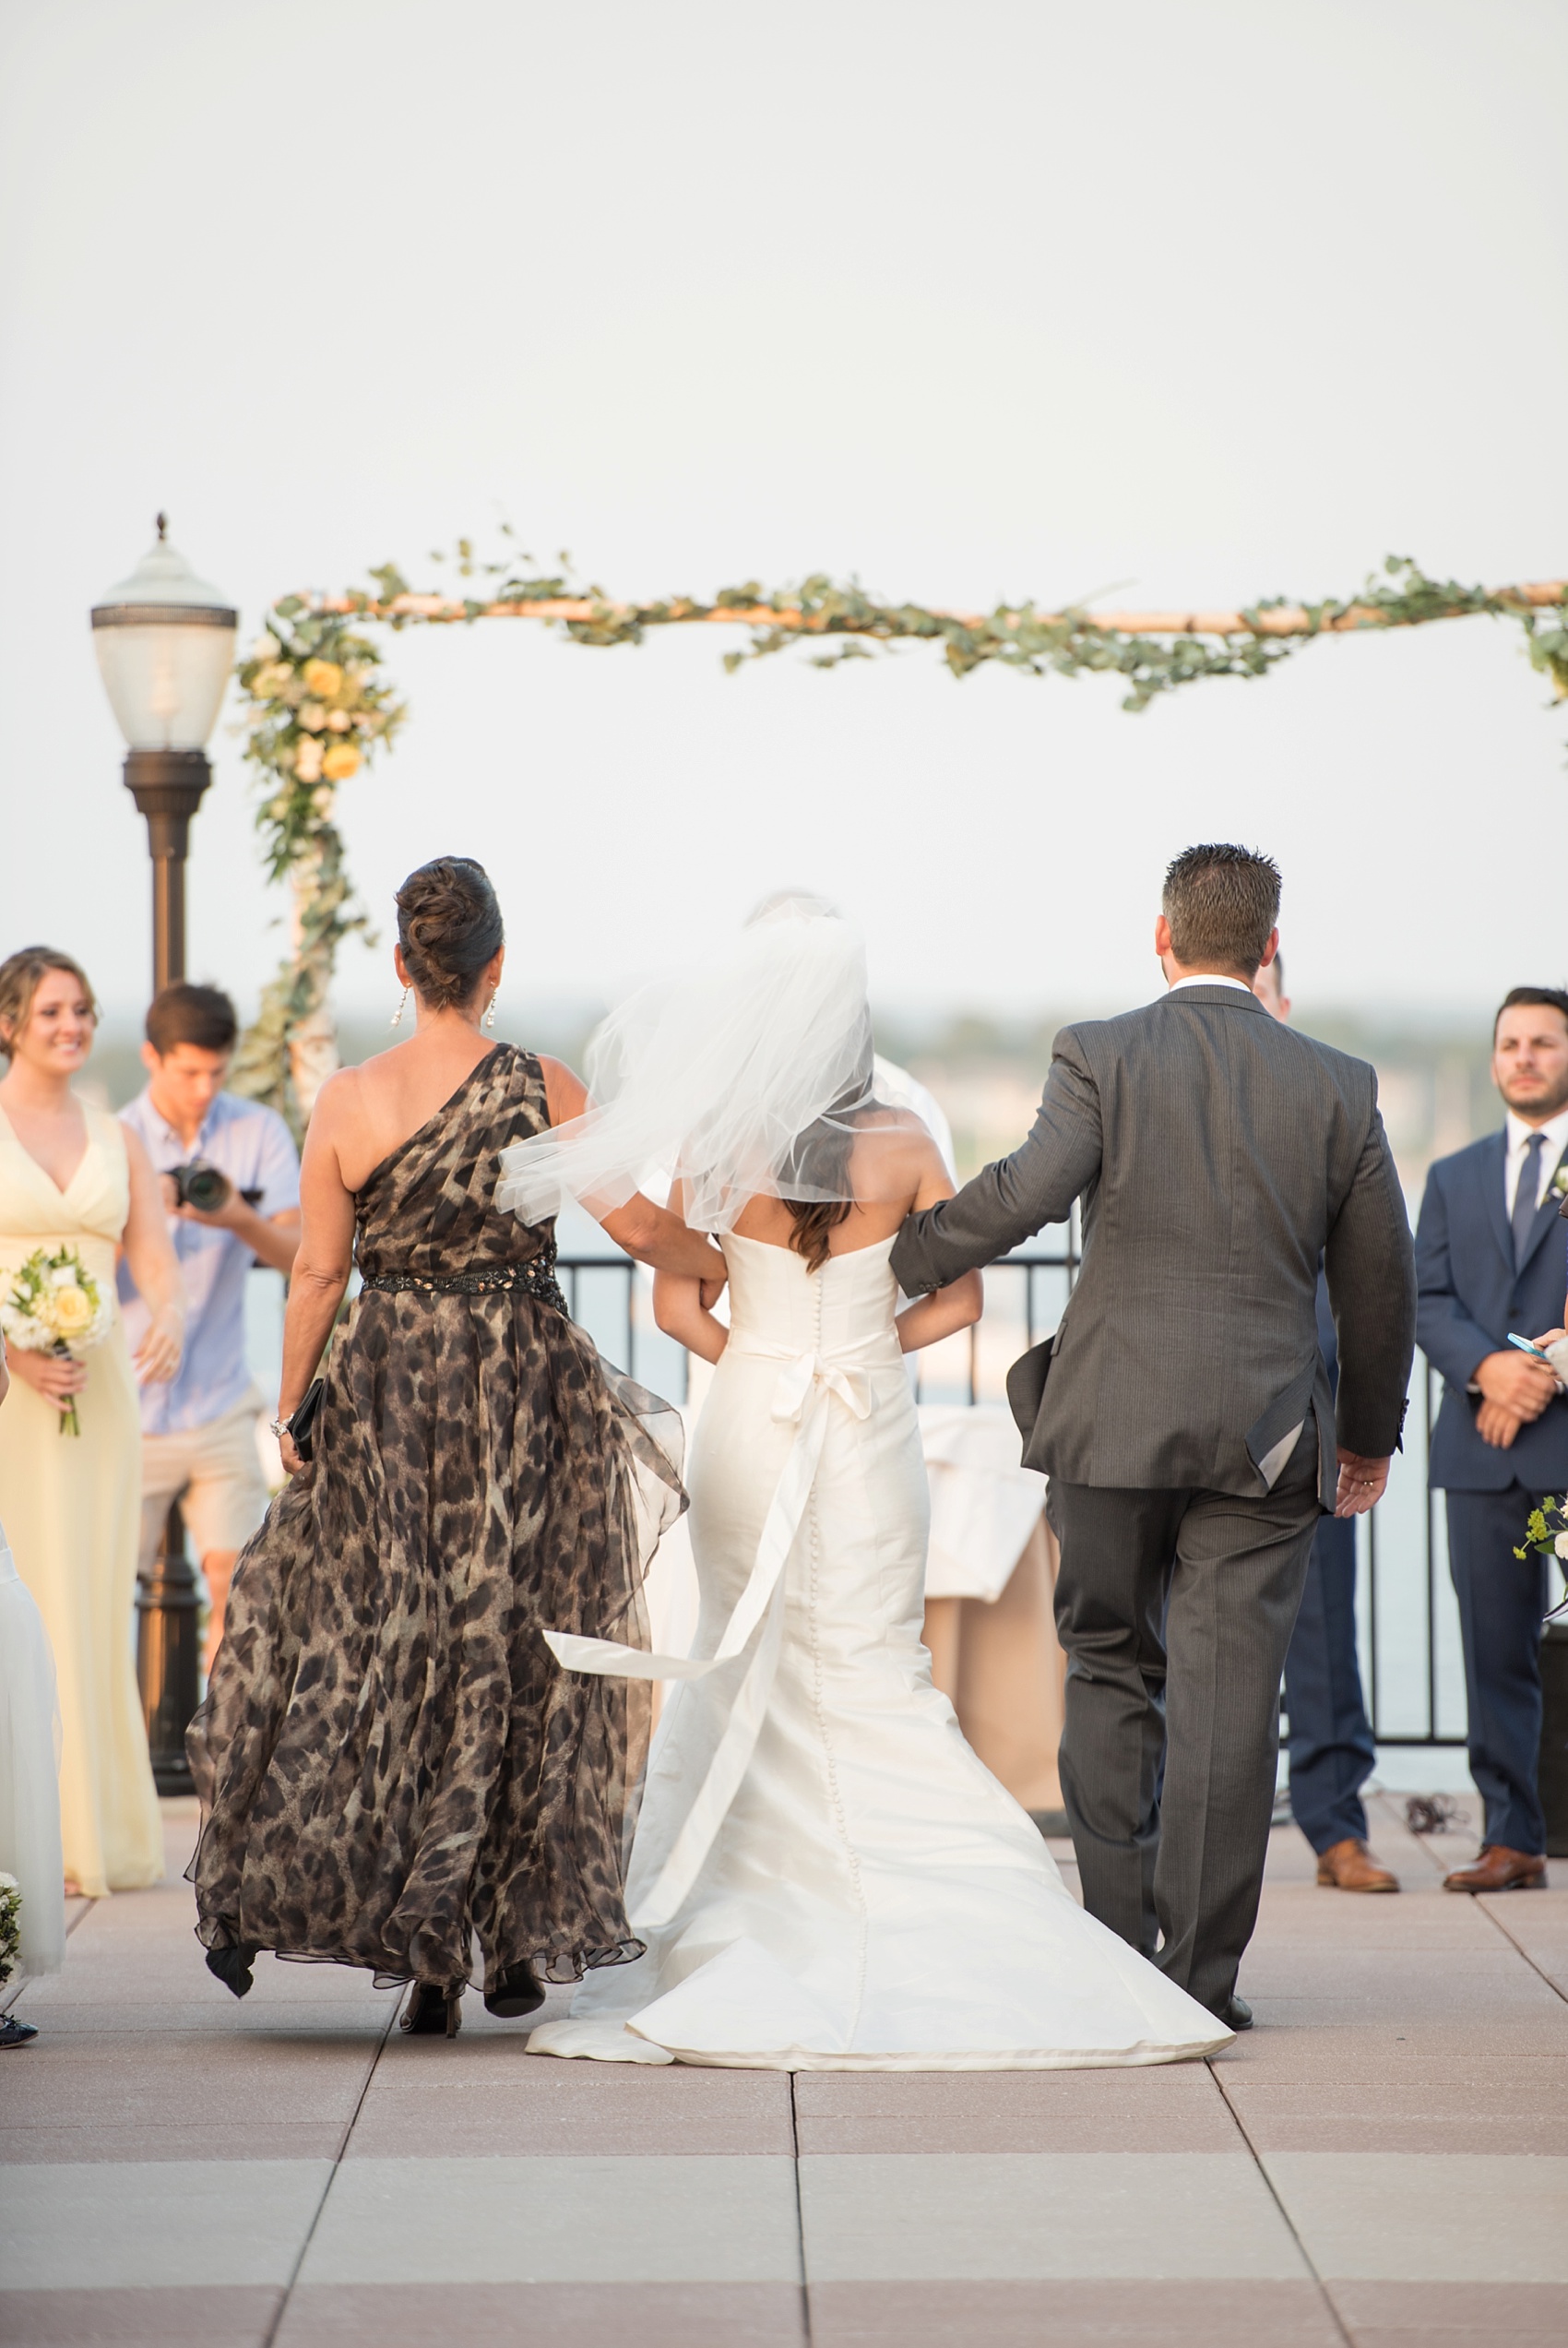 New Jersey waterfront wedding ceremony for a nautical day at the Molly Pitcher Inn. Photo by Mikkel Paige Photography.